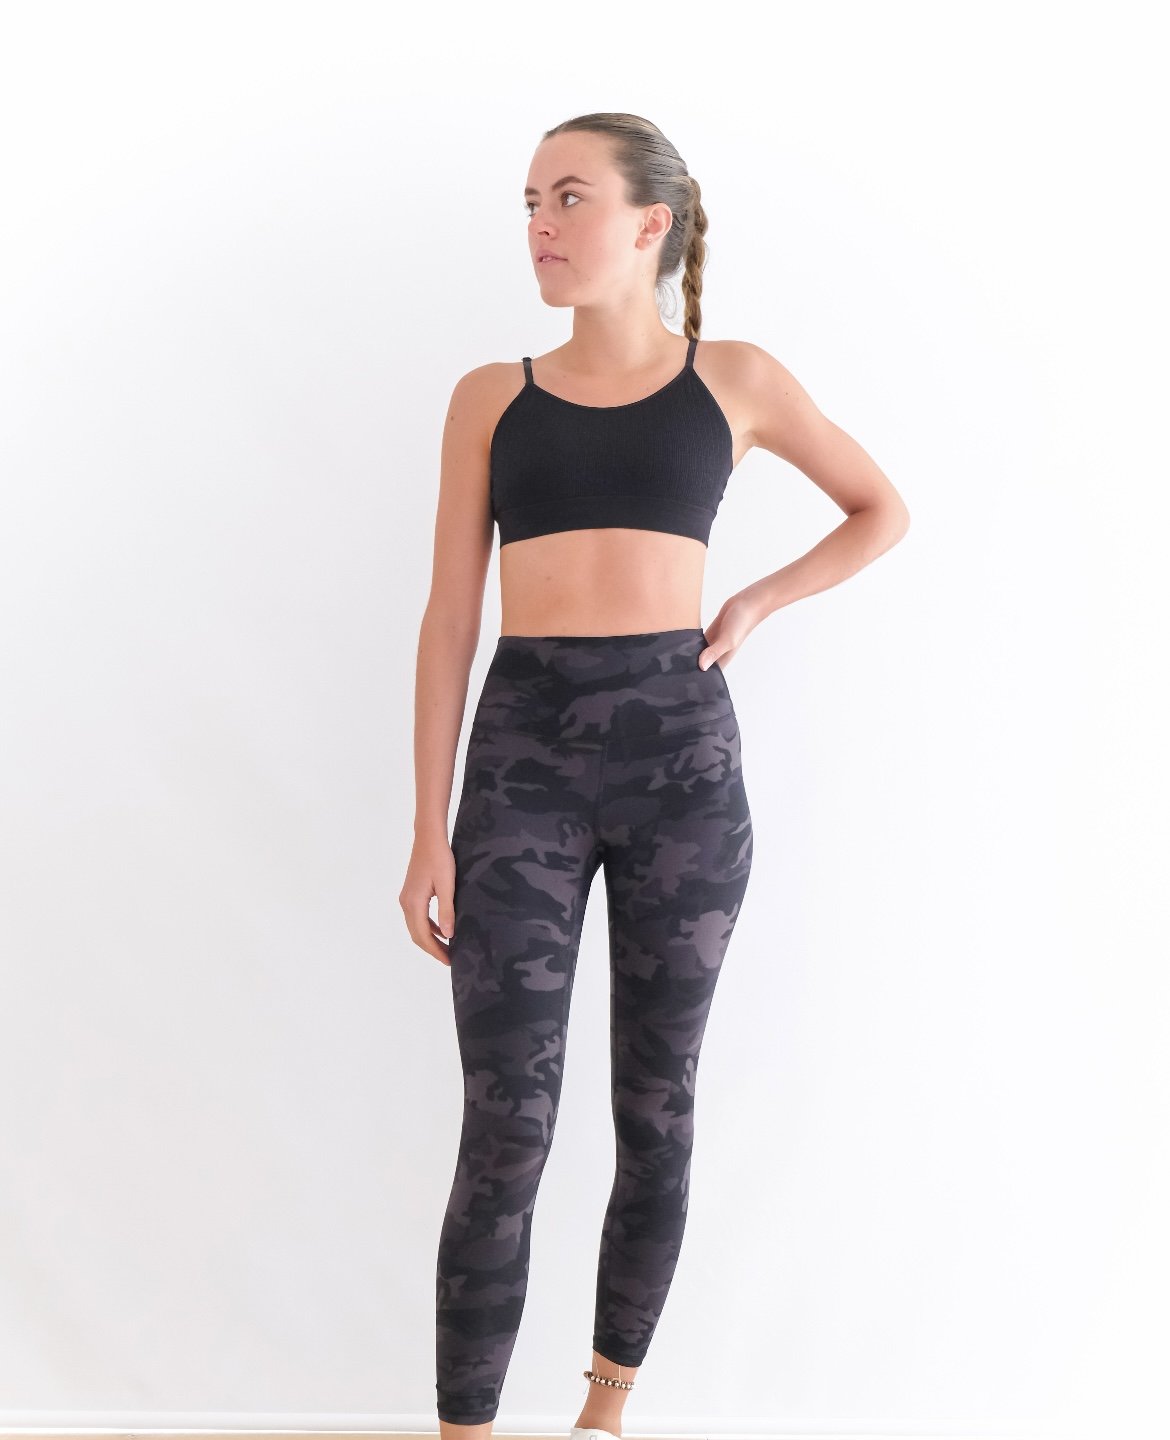 Shop our high performance women's sport leggings built with top